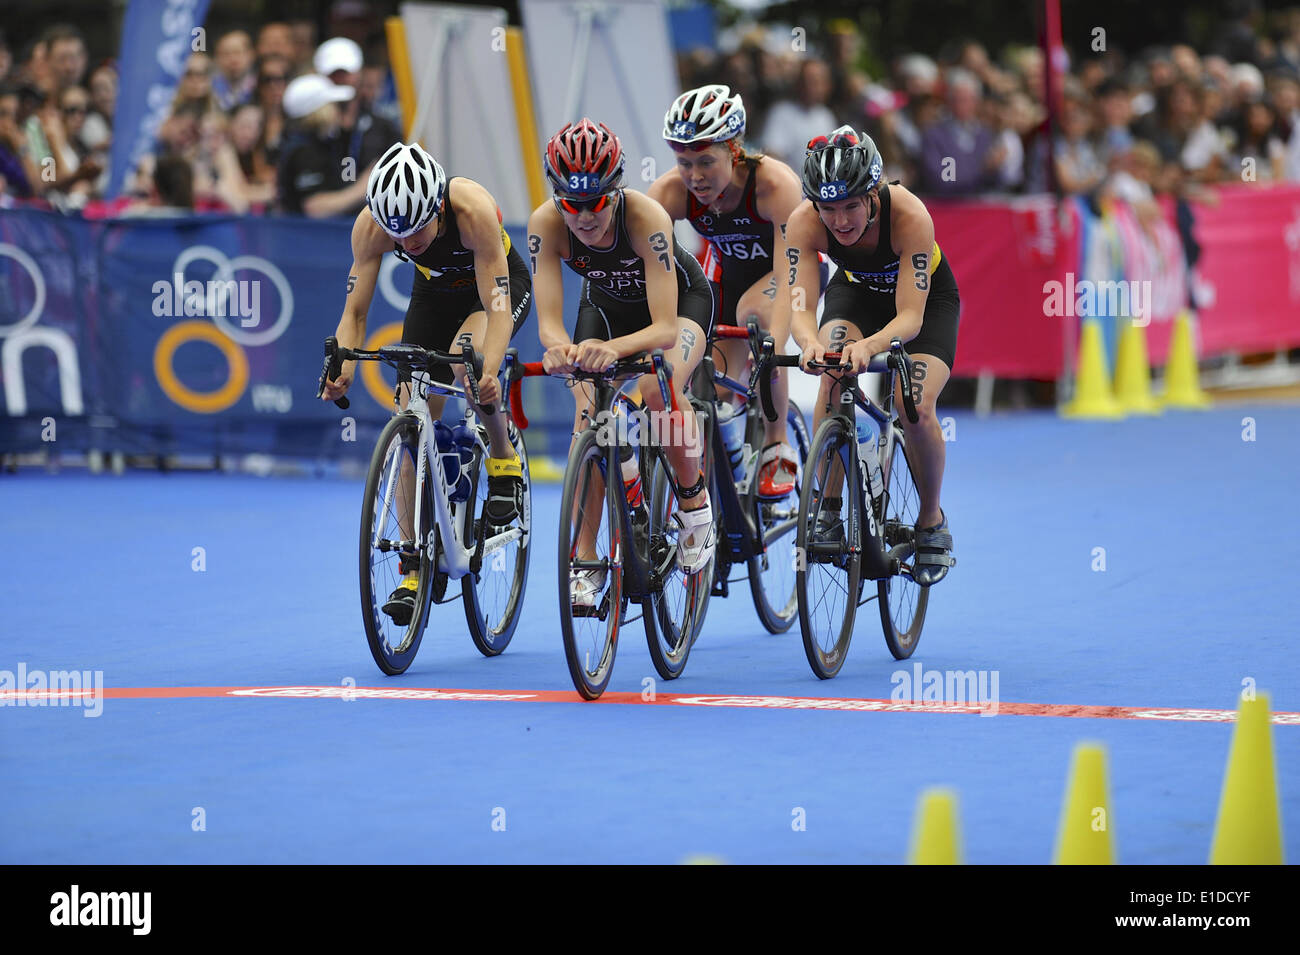 London, UK. 31st May, 2014. A small group of chase riders during the cycling component of the ITU Elite Women's Triathlon. Riders are, L to R: Anne Haug (GER), Yuko Takahashi (JPN), Chelsea Burns (USA) and Lisa Sieburger (GER). Credit:  Michael Preston/Alamy Live News Stock Photo